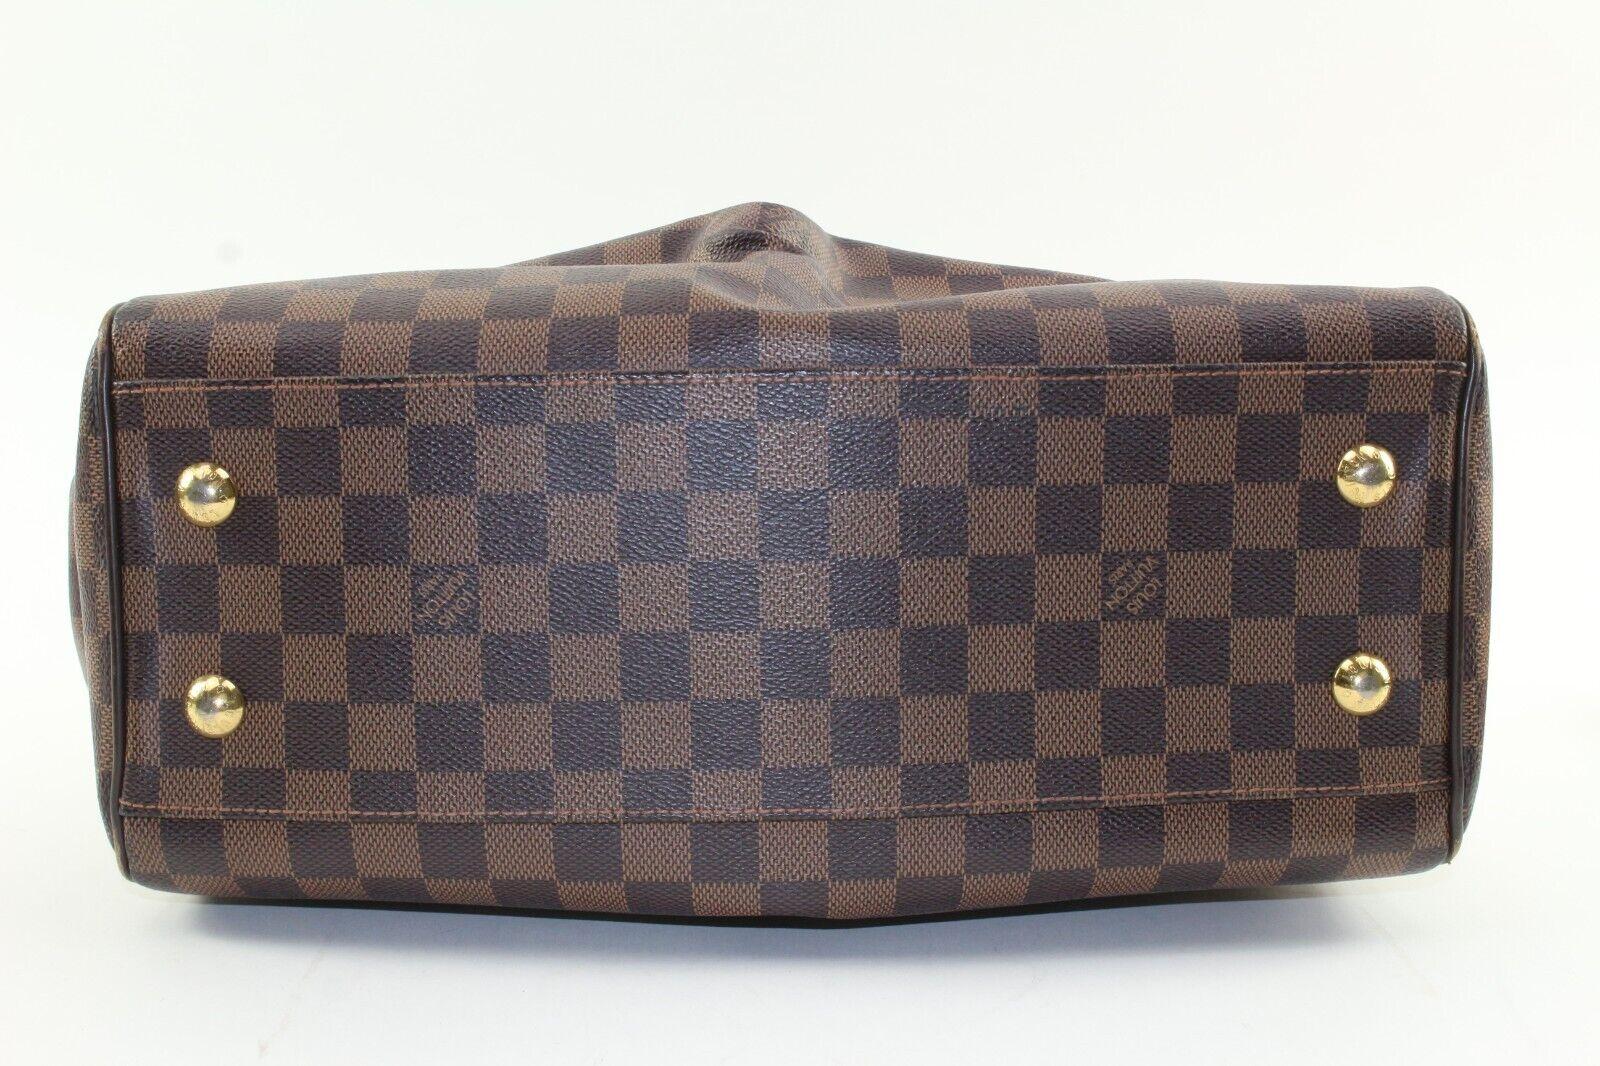 LOUIS VUITTON Trevi Damier Ebene Bowler Bag 4LV1222K In Good Condition For Sale In Dix hills, NY